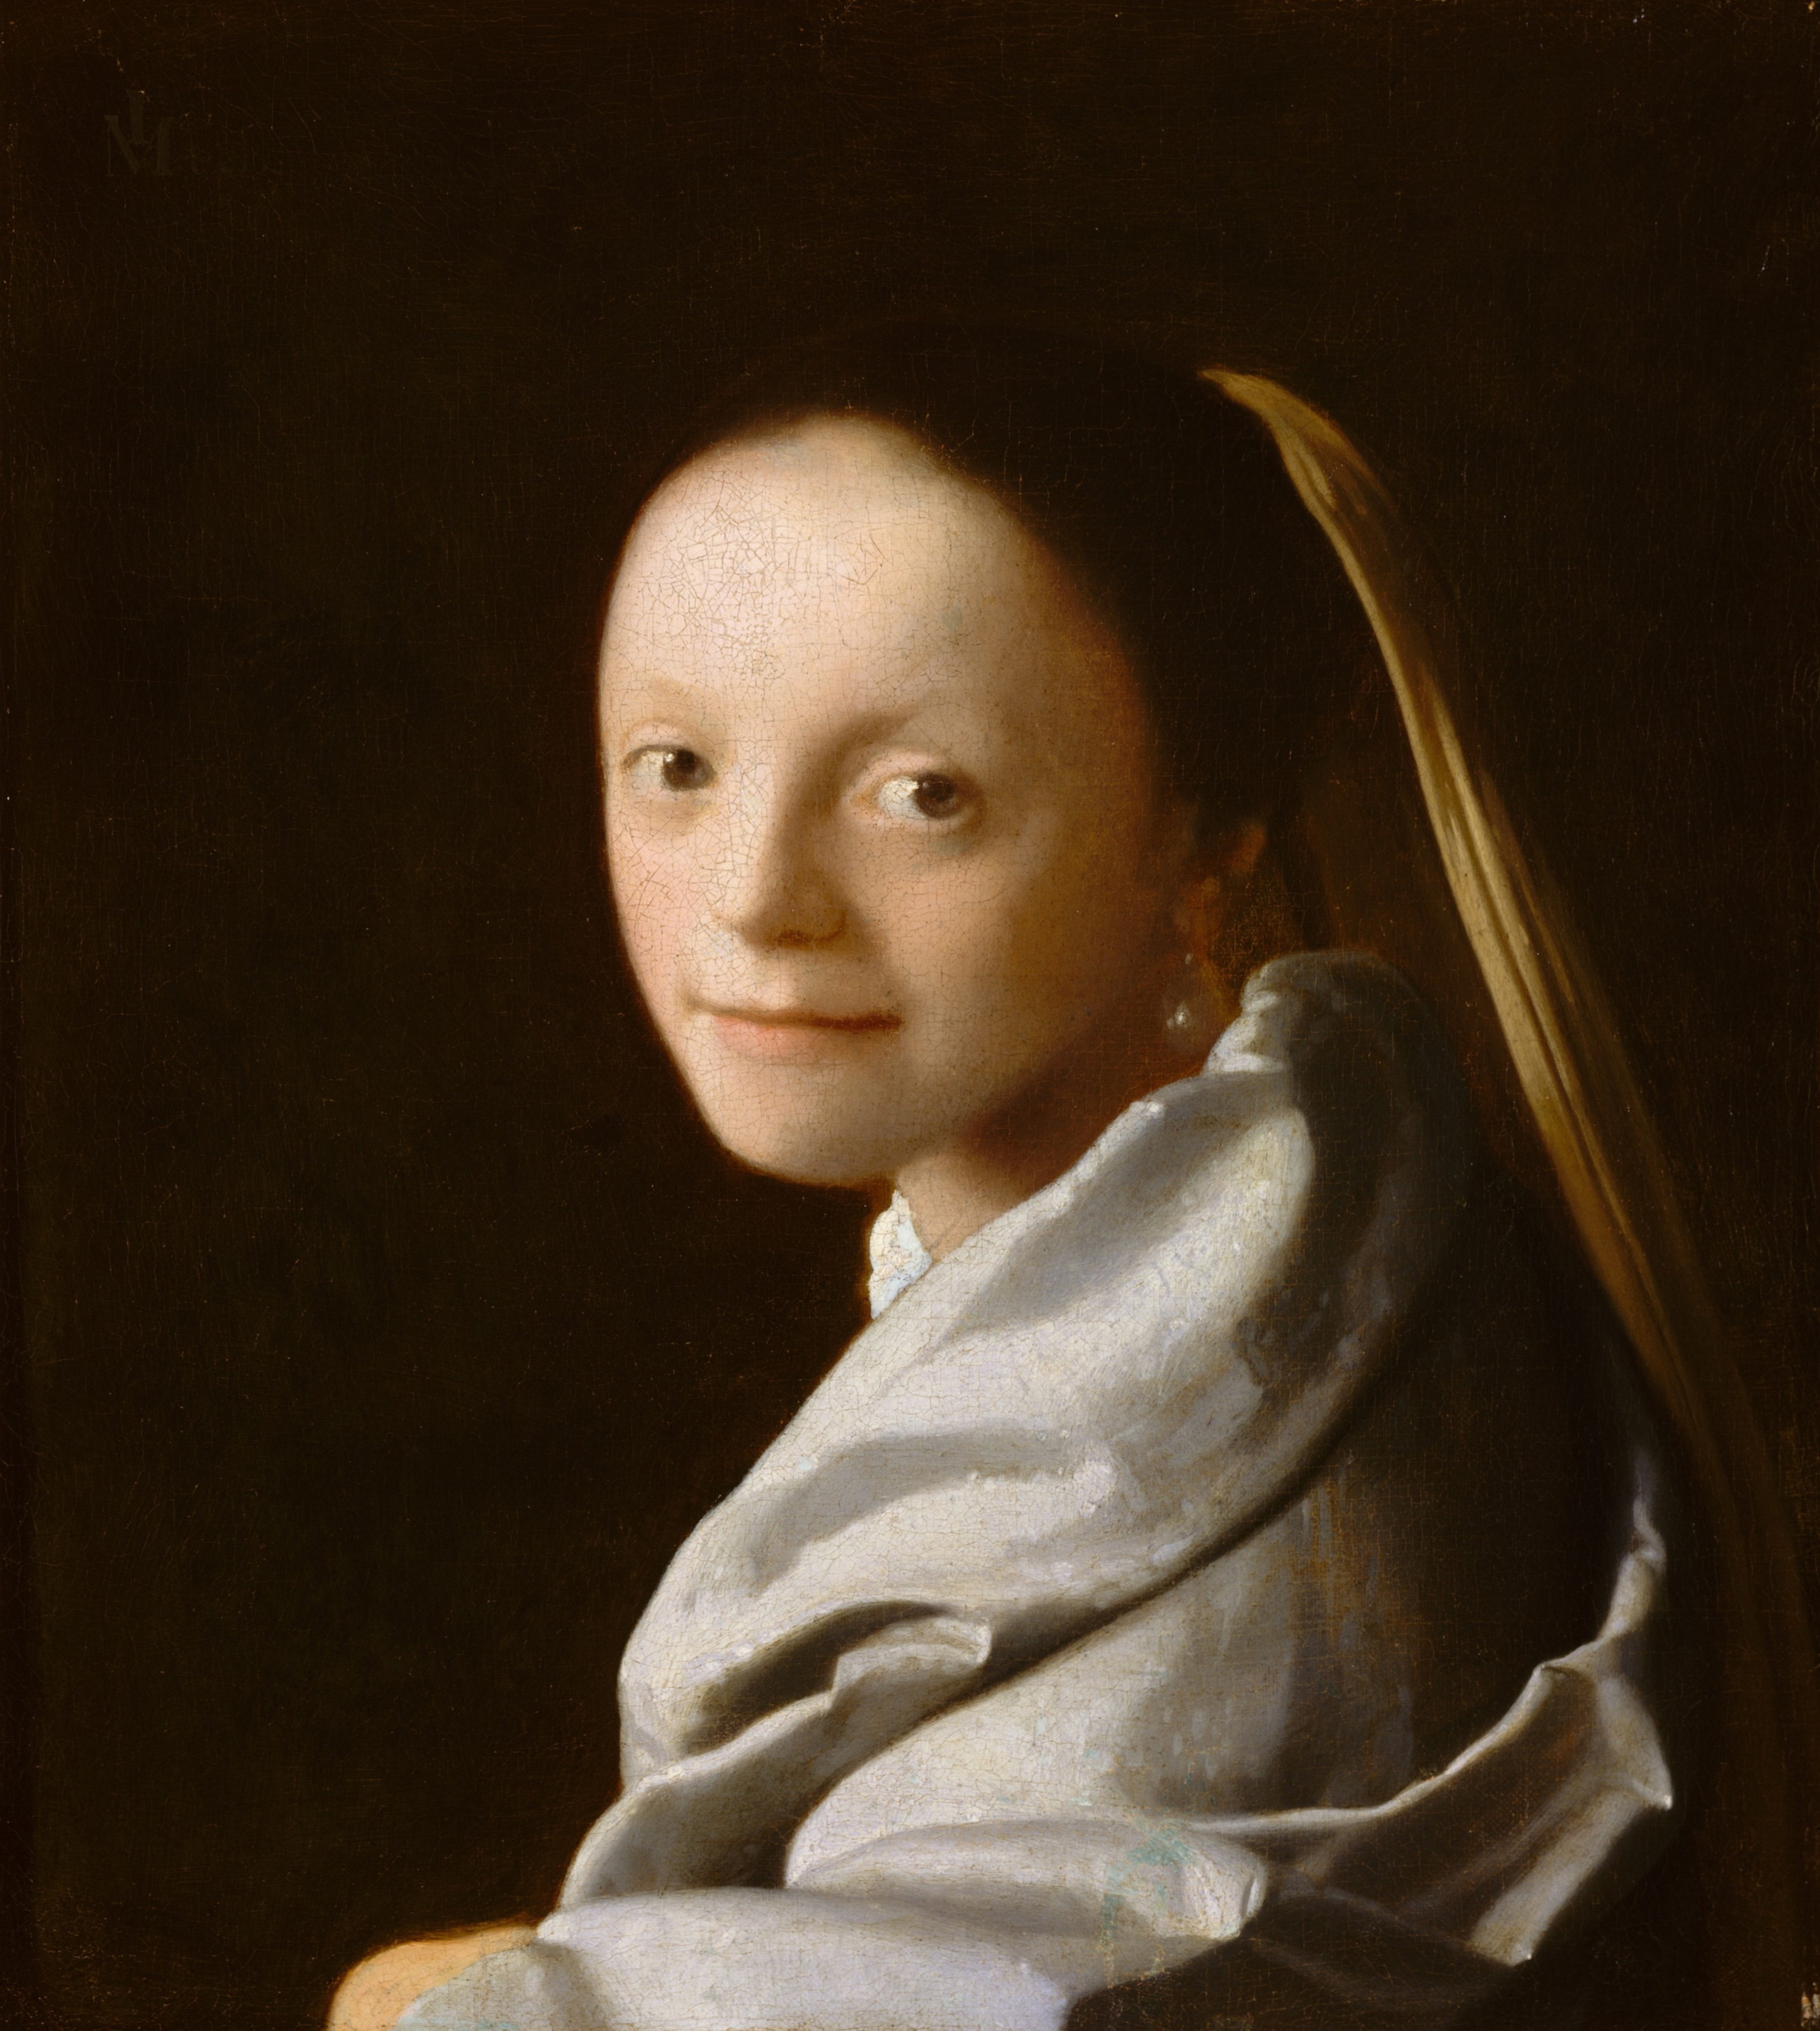 Portrait of a Young Woman (Vermeer) - Wikipedia